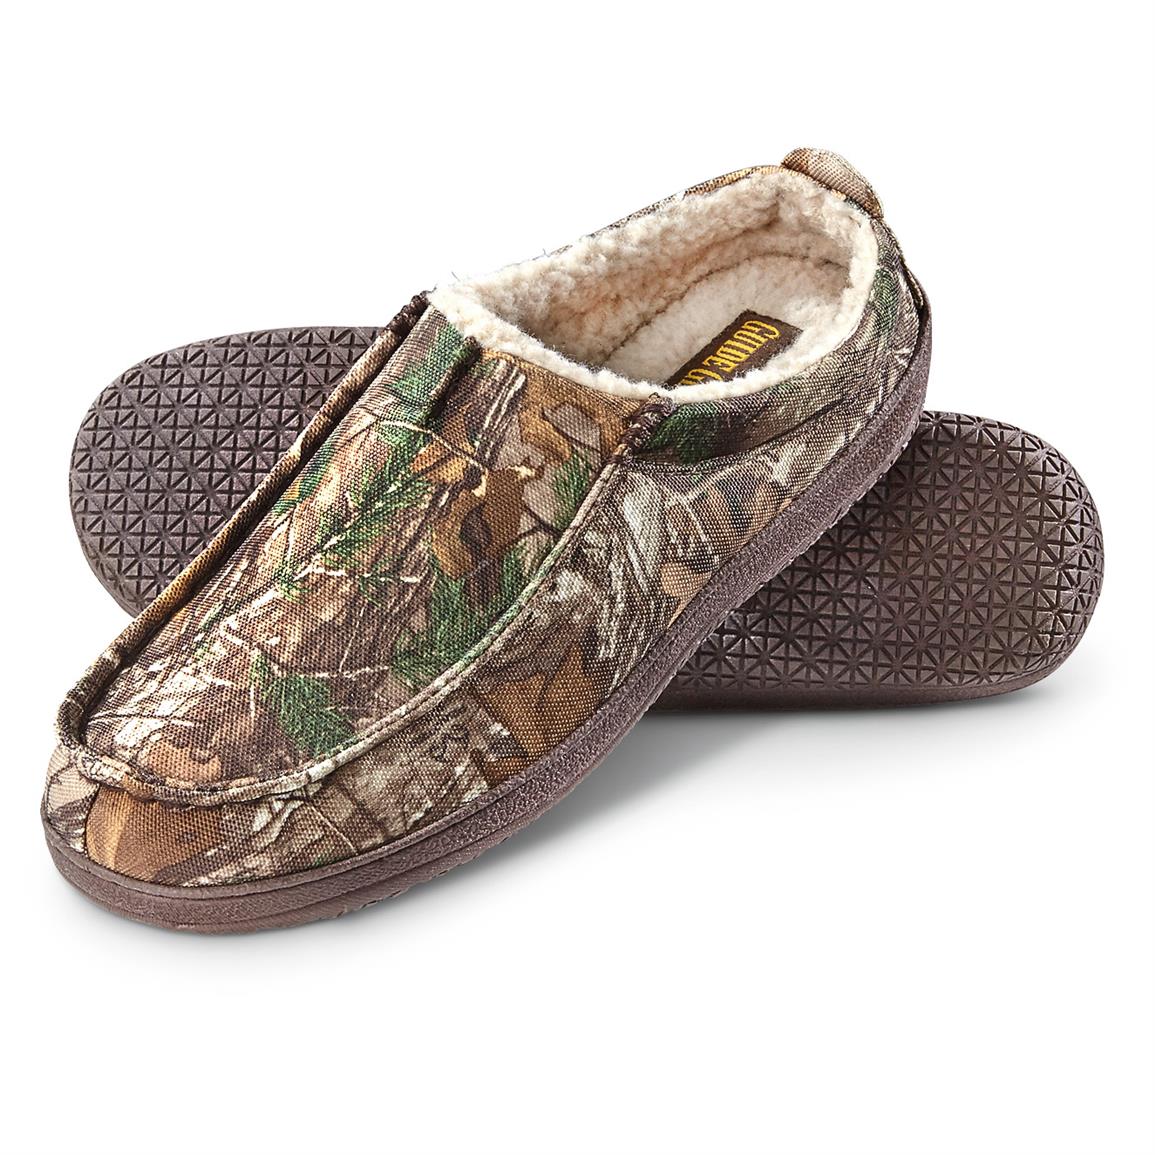 Guide Gear Deer Camp Men's Camo Moccasins - 648653, Slippers at ...